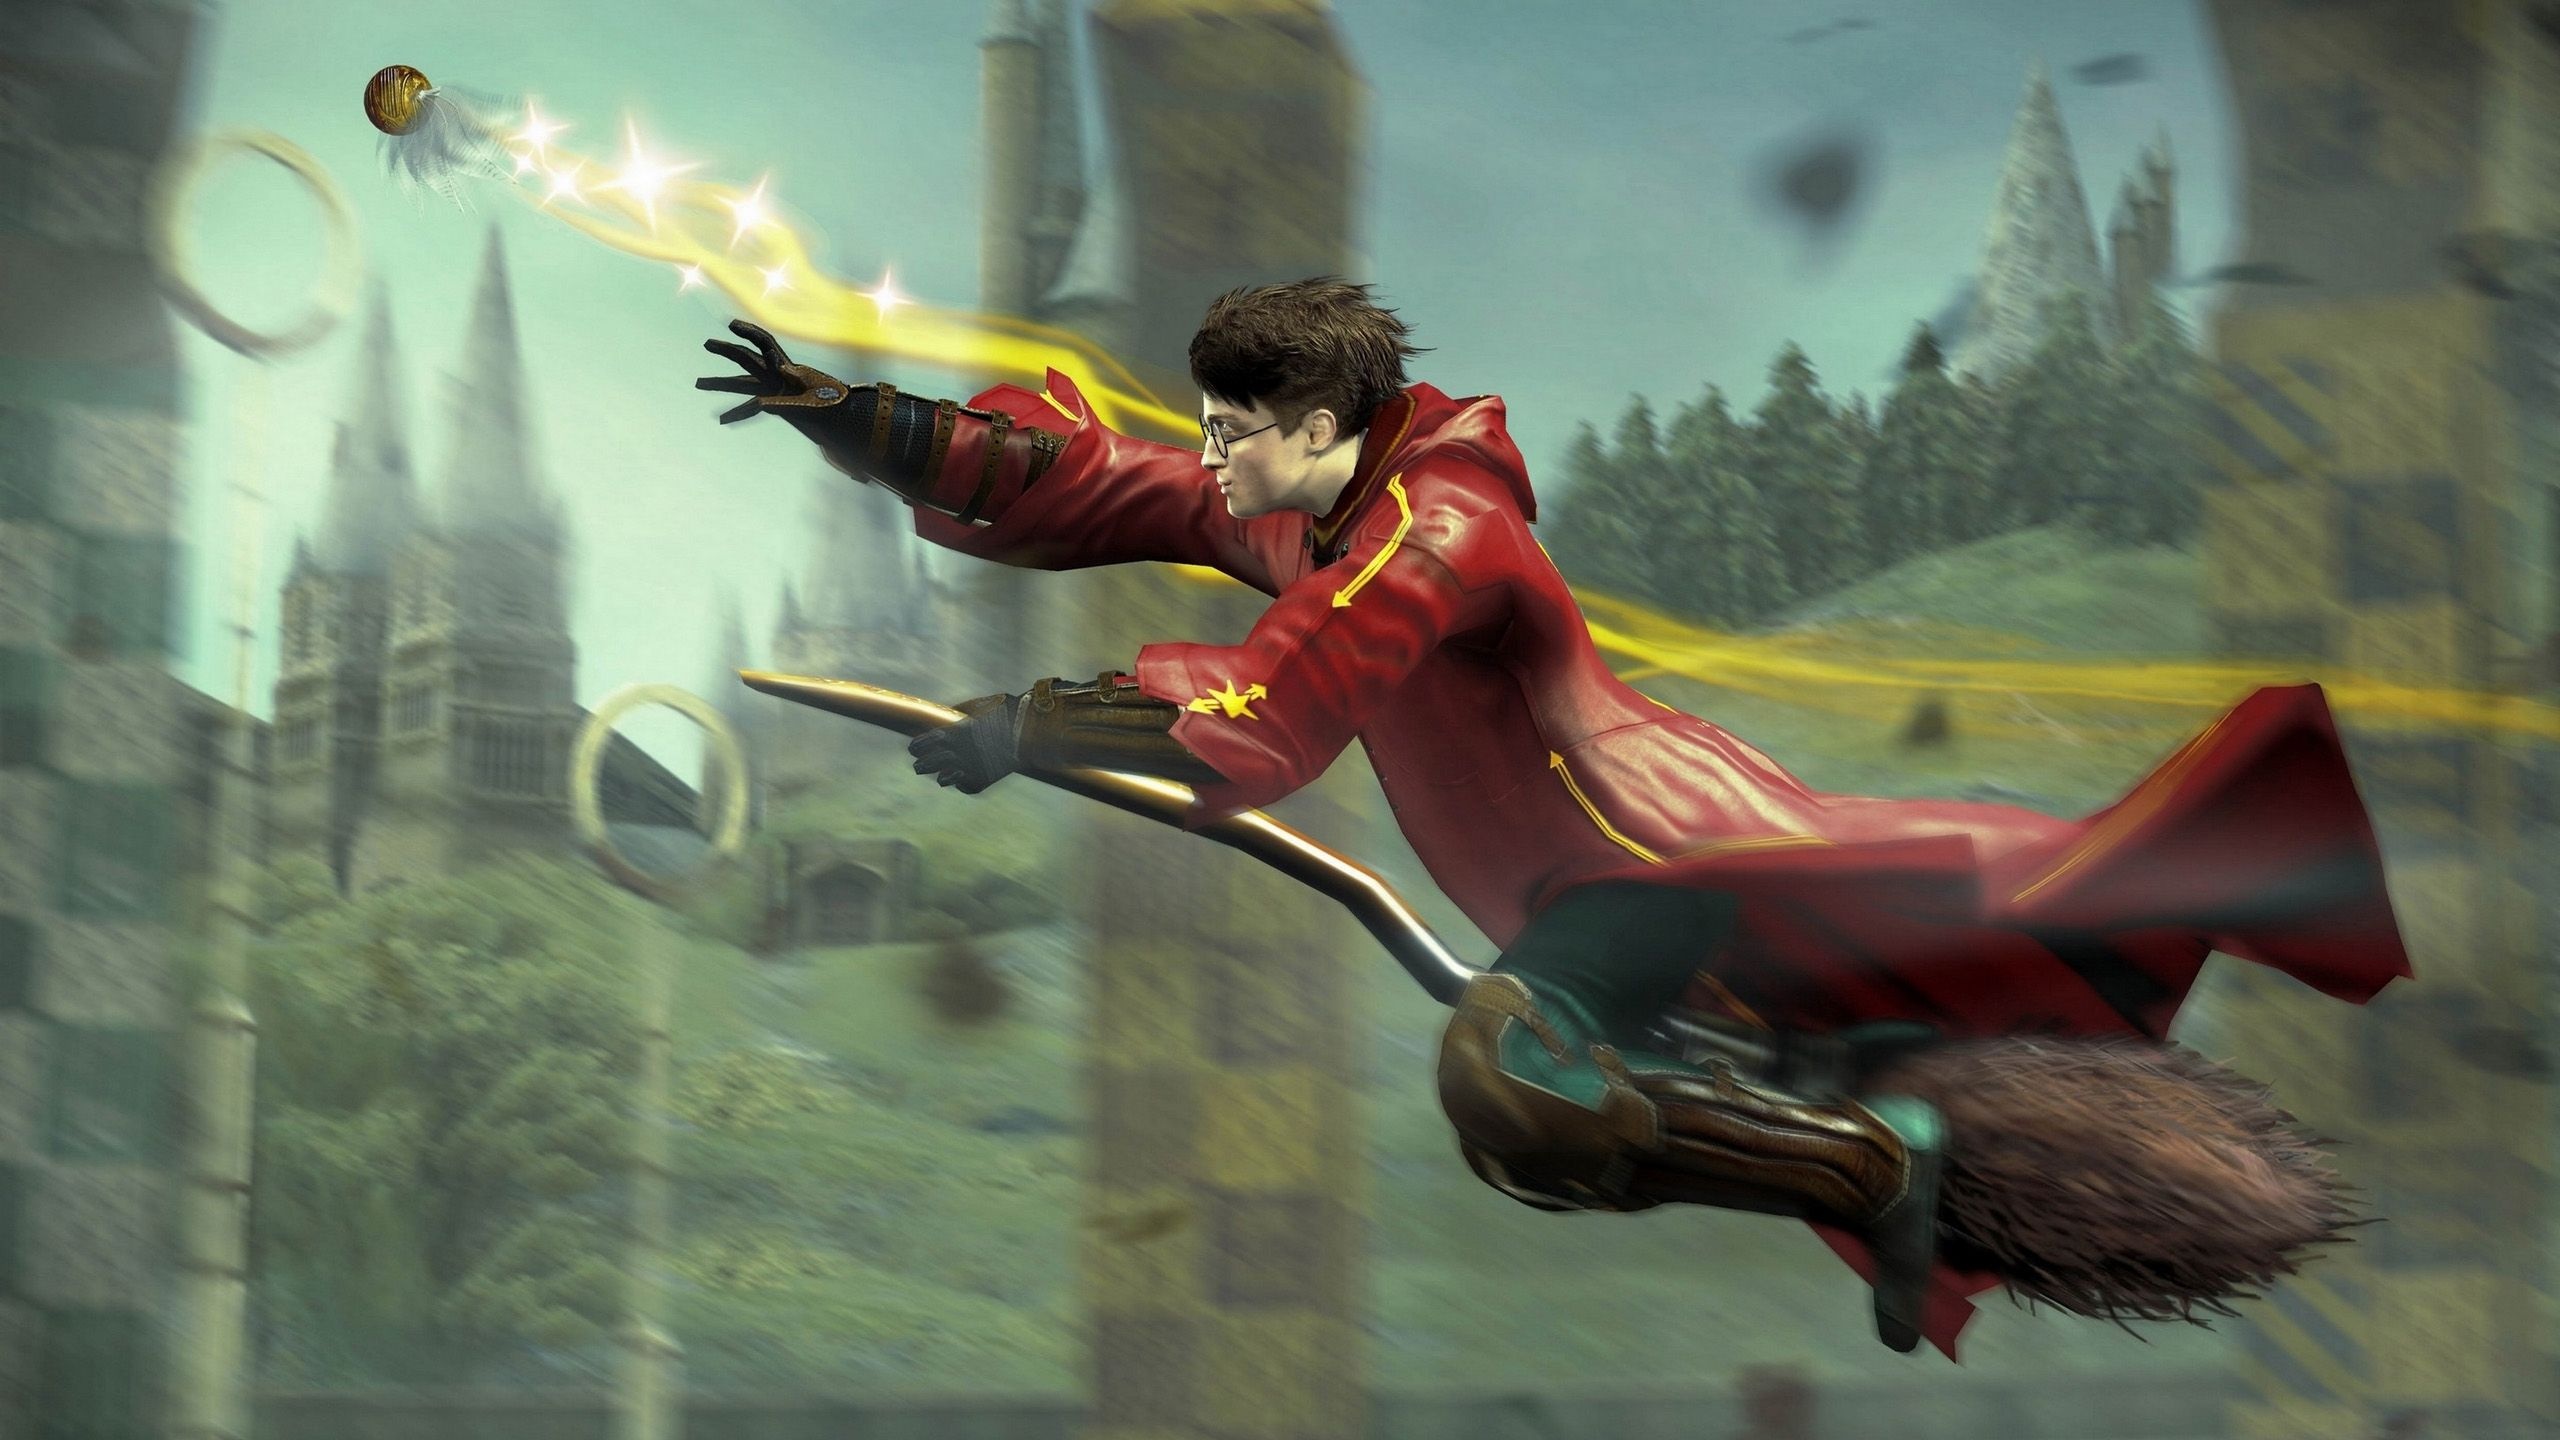 Harry Potter, Quidditch desktop wallpapers, Magical adventure, Chasing the snitch, 2560x1440 HD Desktop